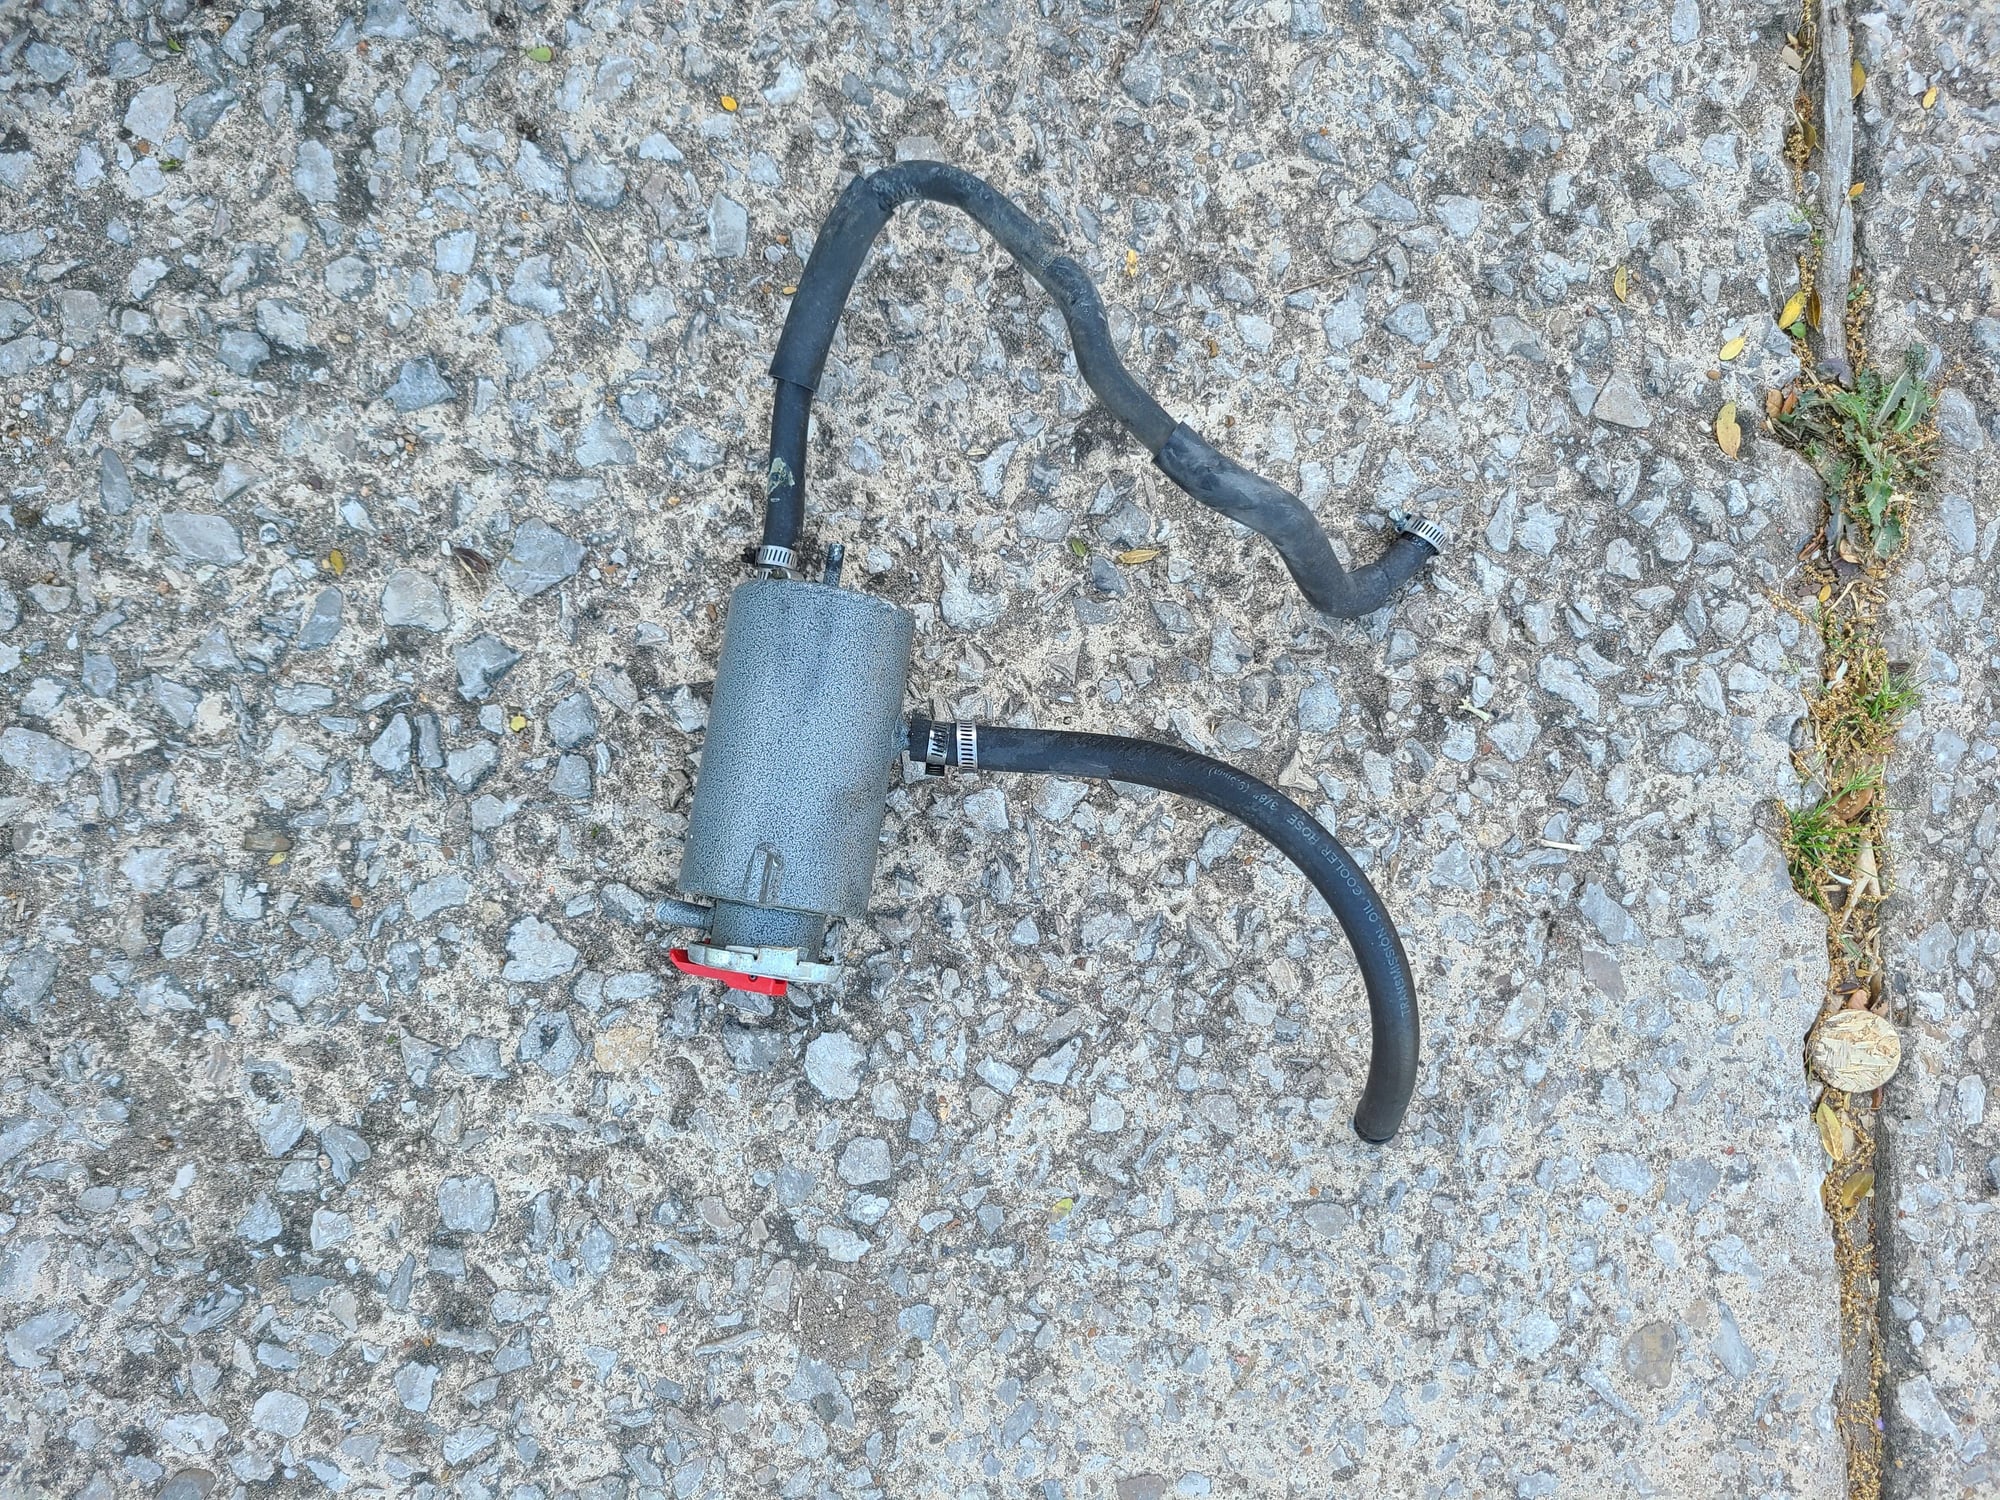 Accessories - FD Aluminum AST, Front Tow Hook, Oil Catch can - Used - 1993 to 1995 Mazda RX-7 - Dallas, TX 75237, United States